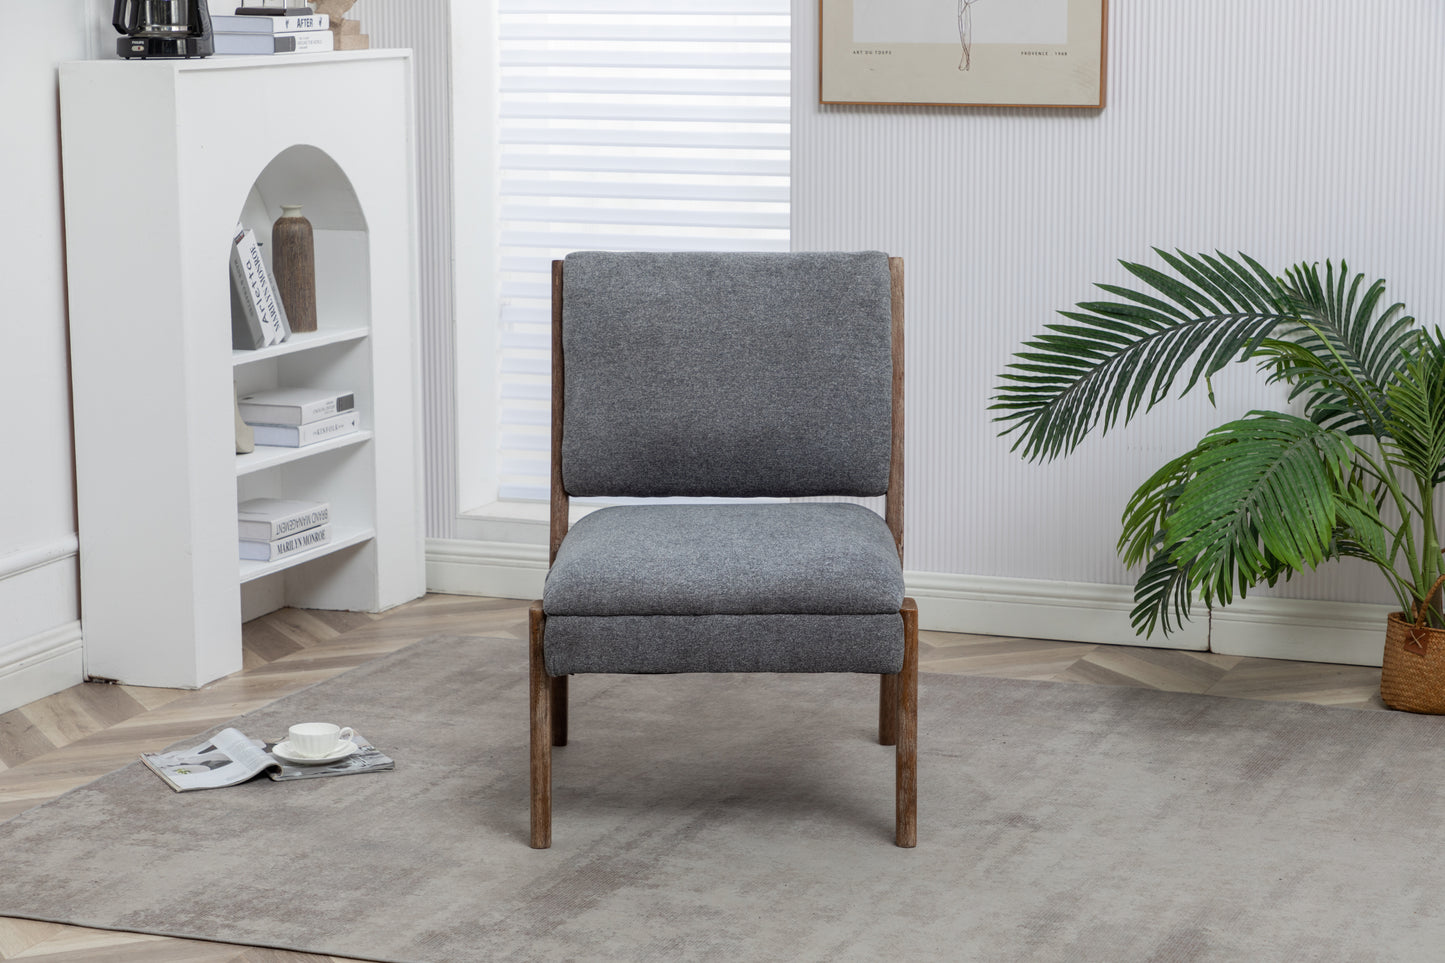 Accent chair, wooden legs, padded upholstery, High-density foam, small modern armless chair, living room bedroom, DARK GREY